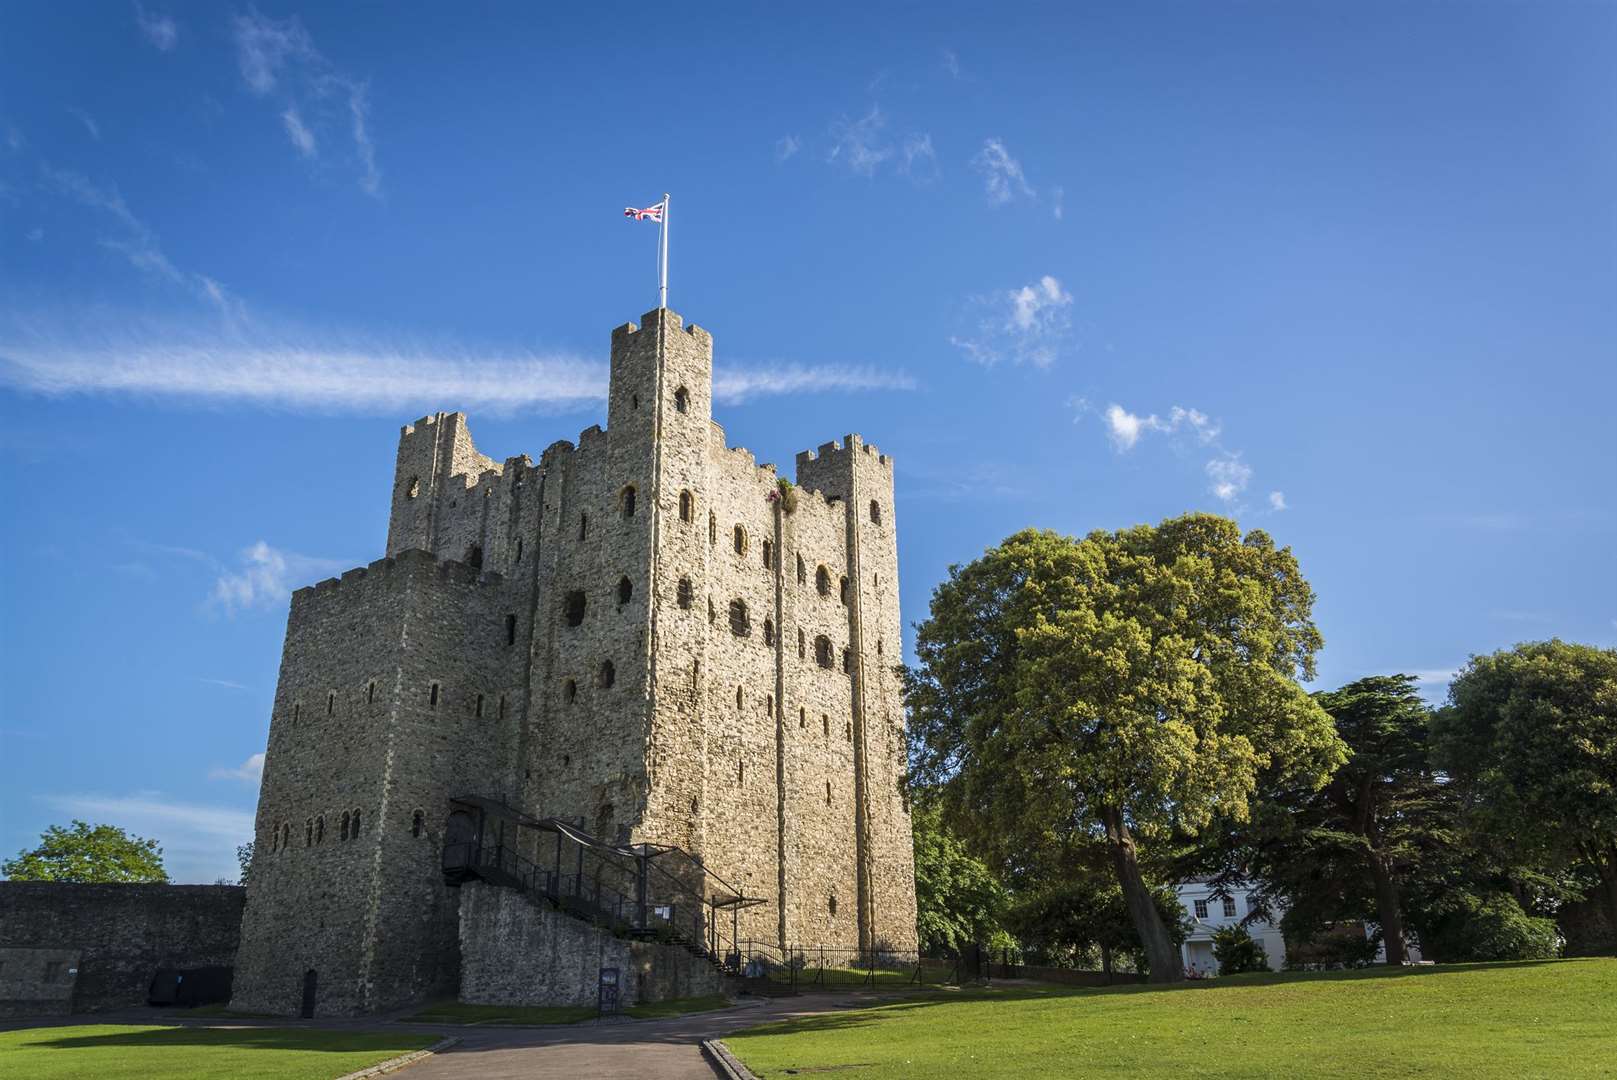 Rochester Castle has been closed until further notice